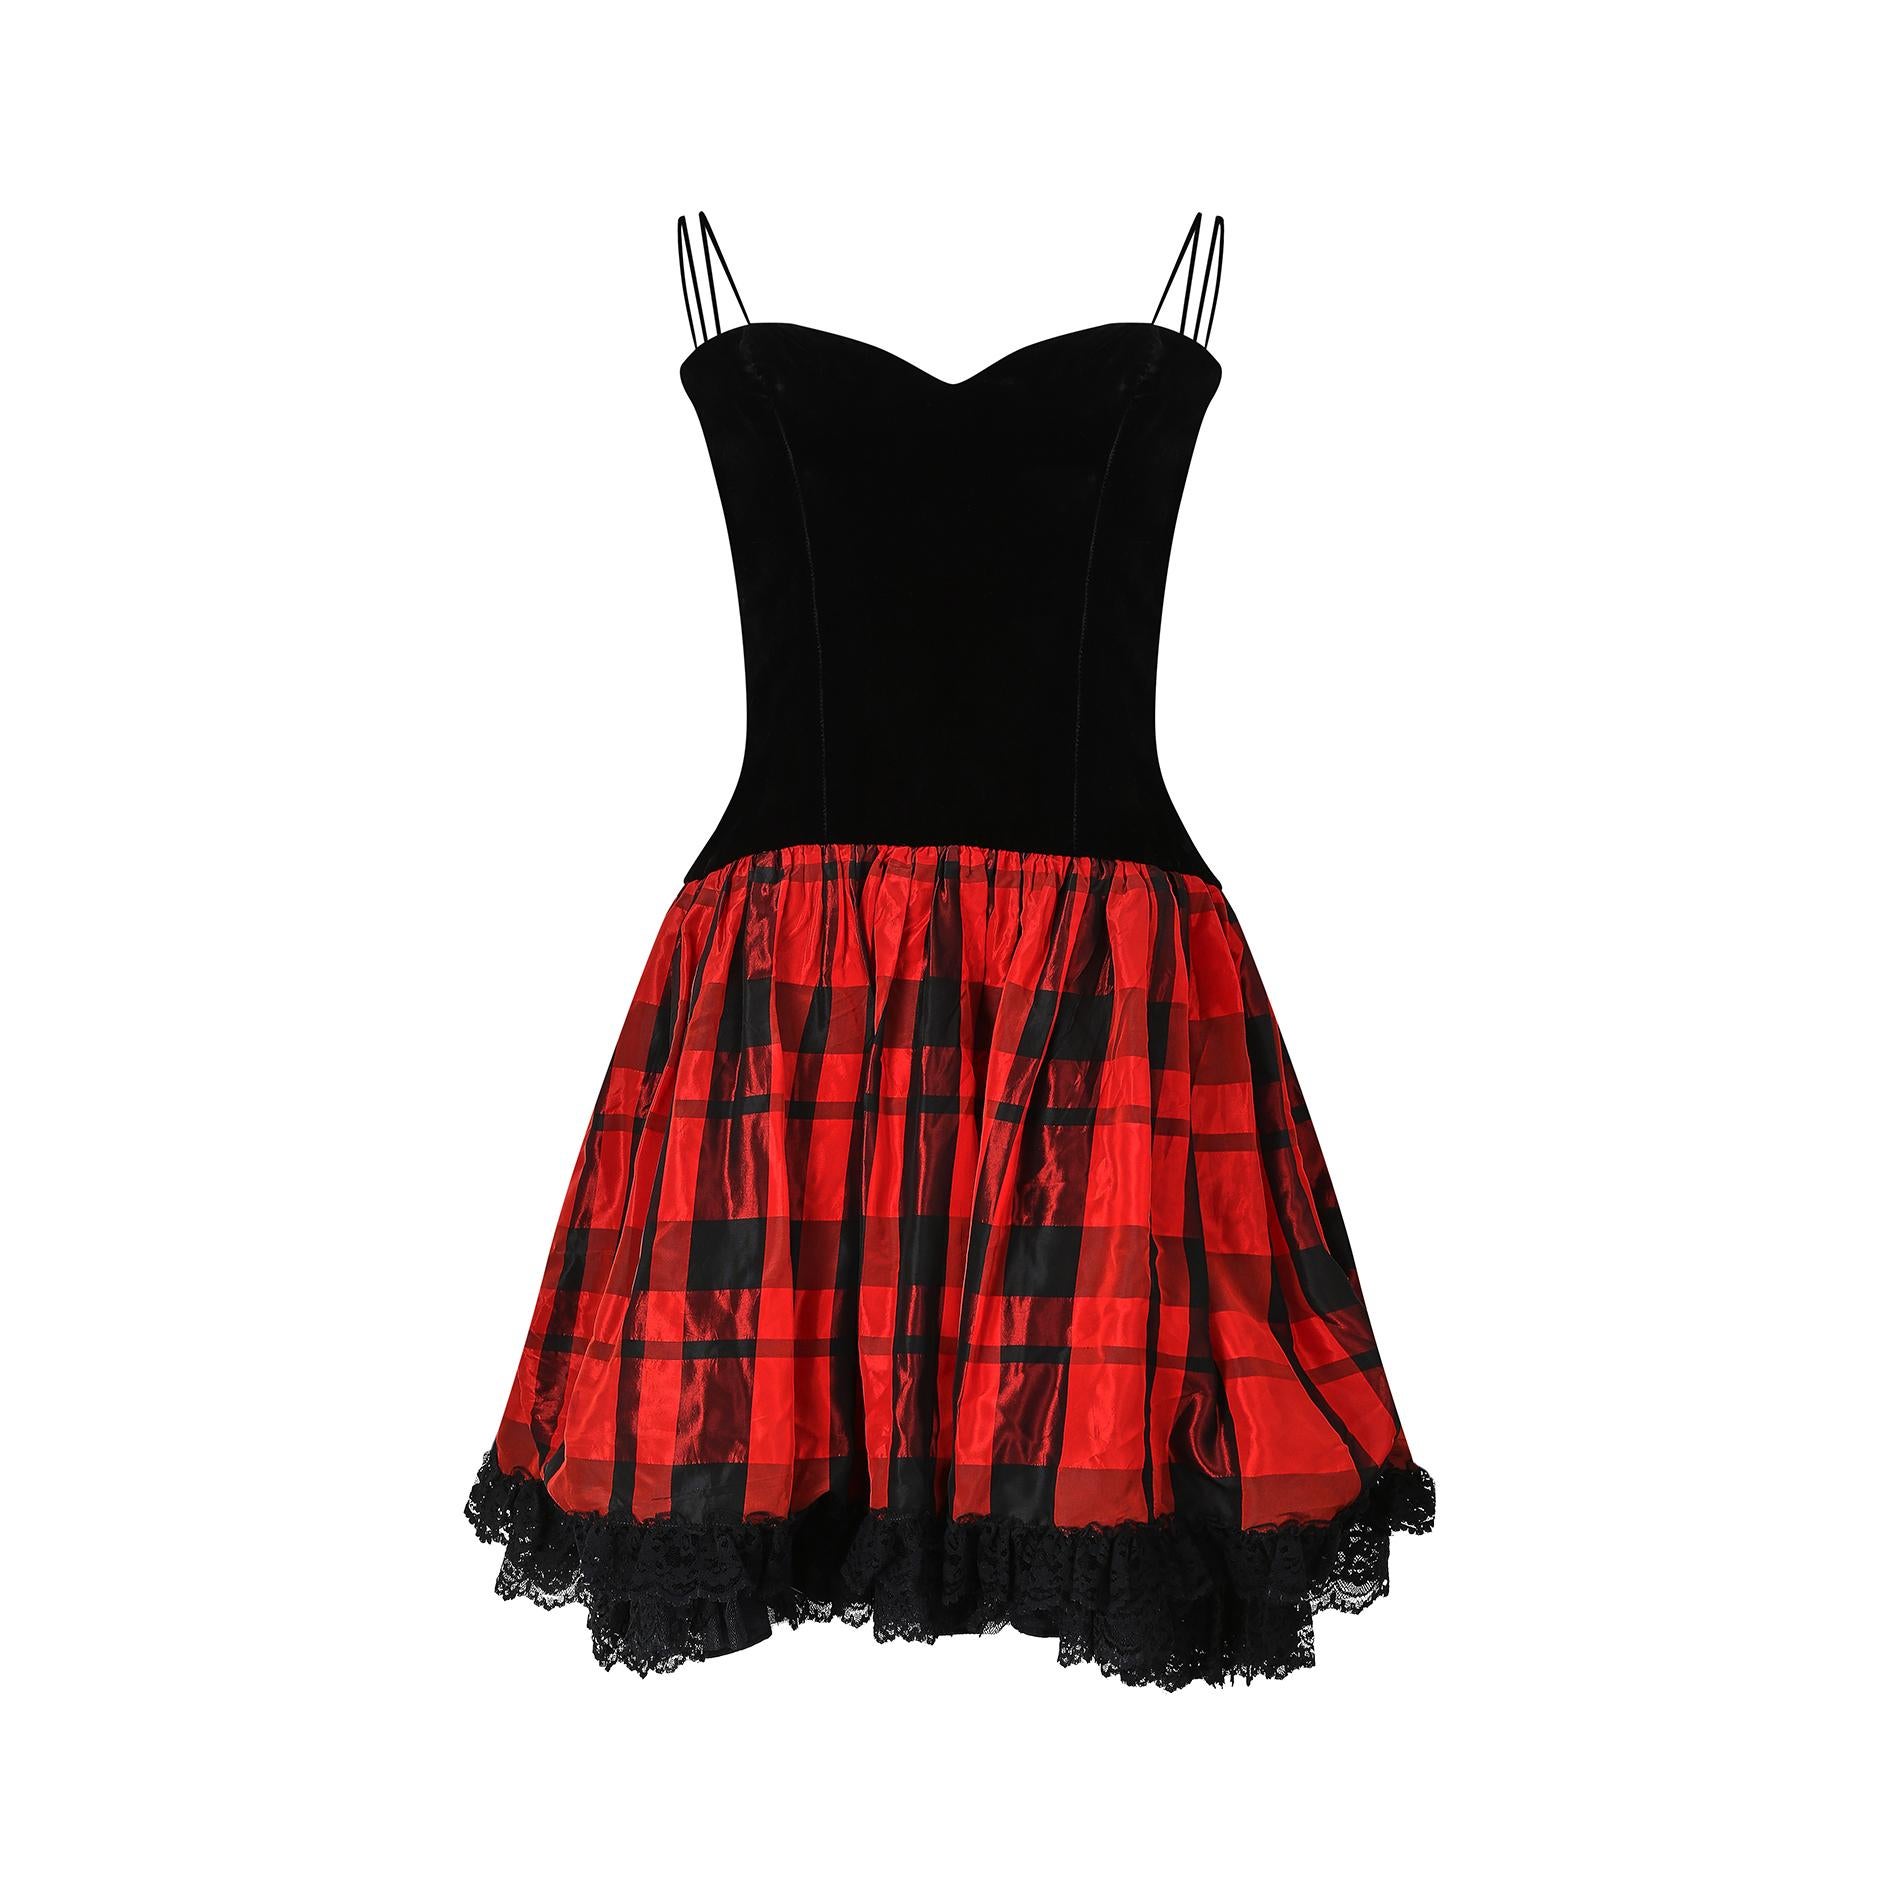 This black and red velvet tartan dress by formal wear specialist John Charles, is perfect for a cèilidh or other lively social event. With a soft velvet bodice, sweetheart neckline and full net skirt, it really epitomises the classic partywear